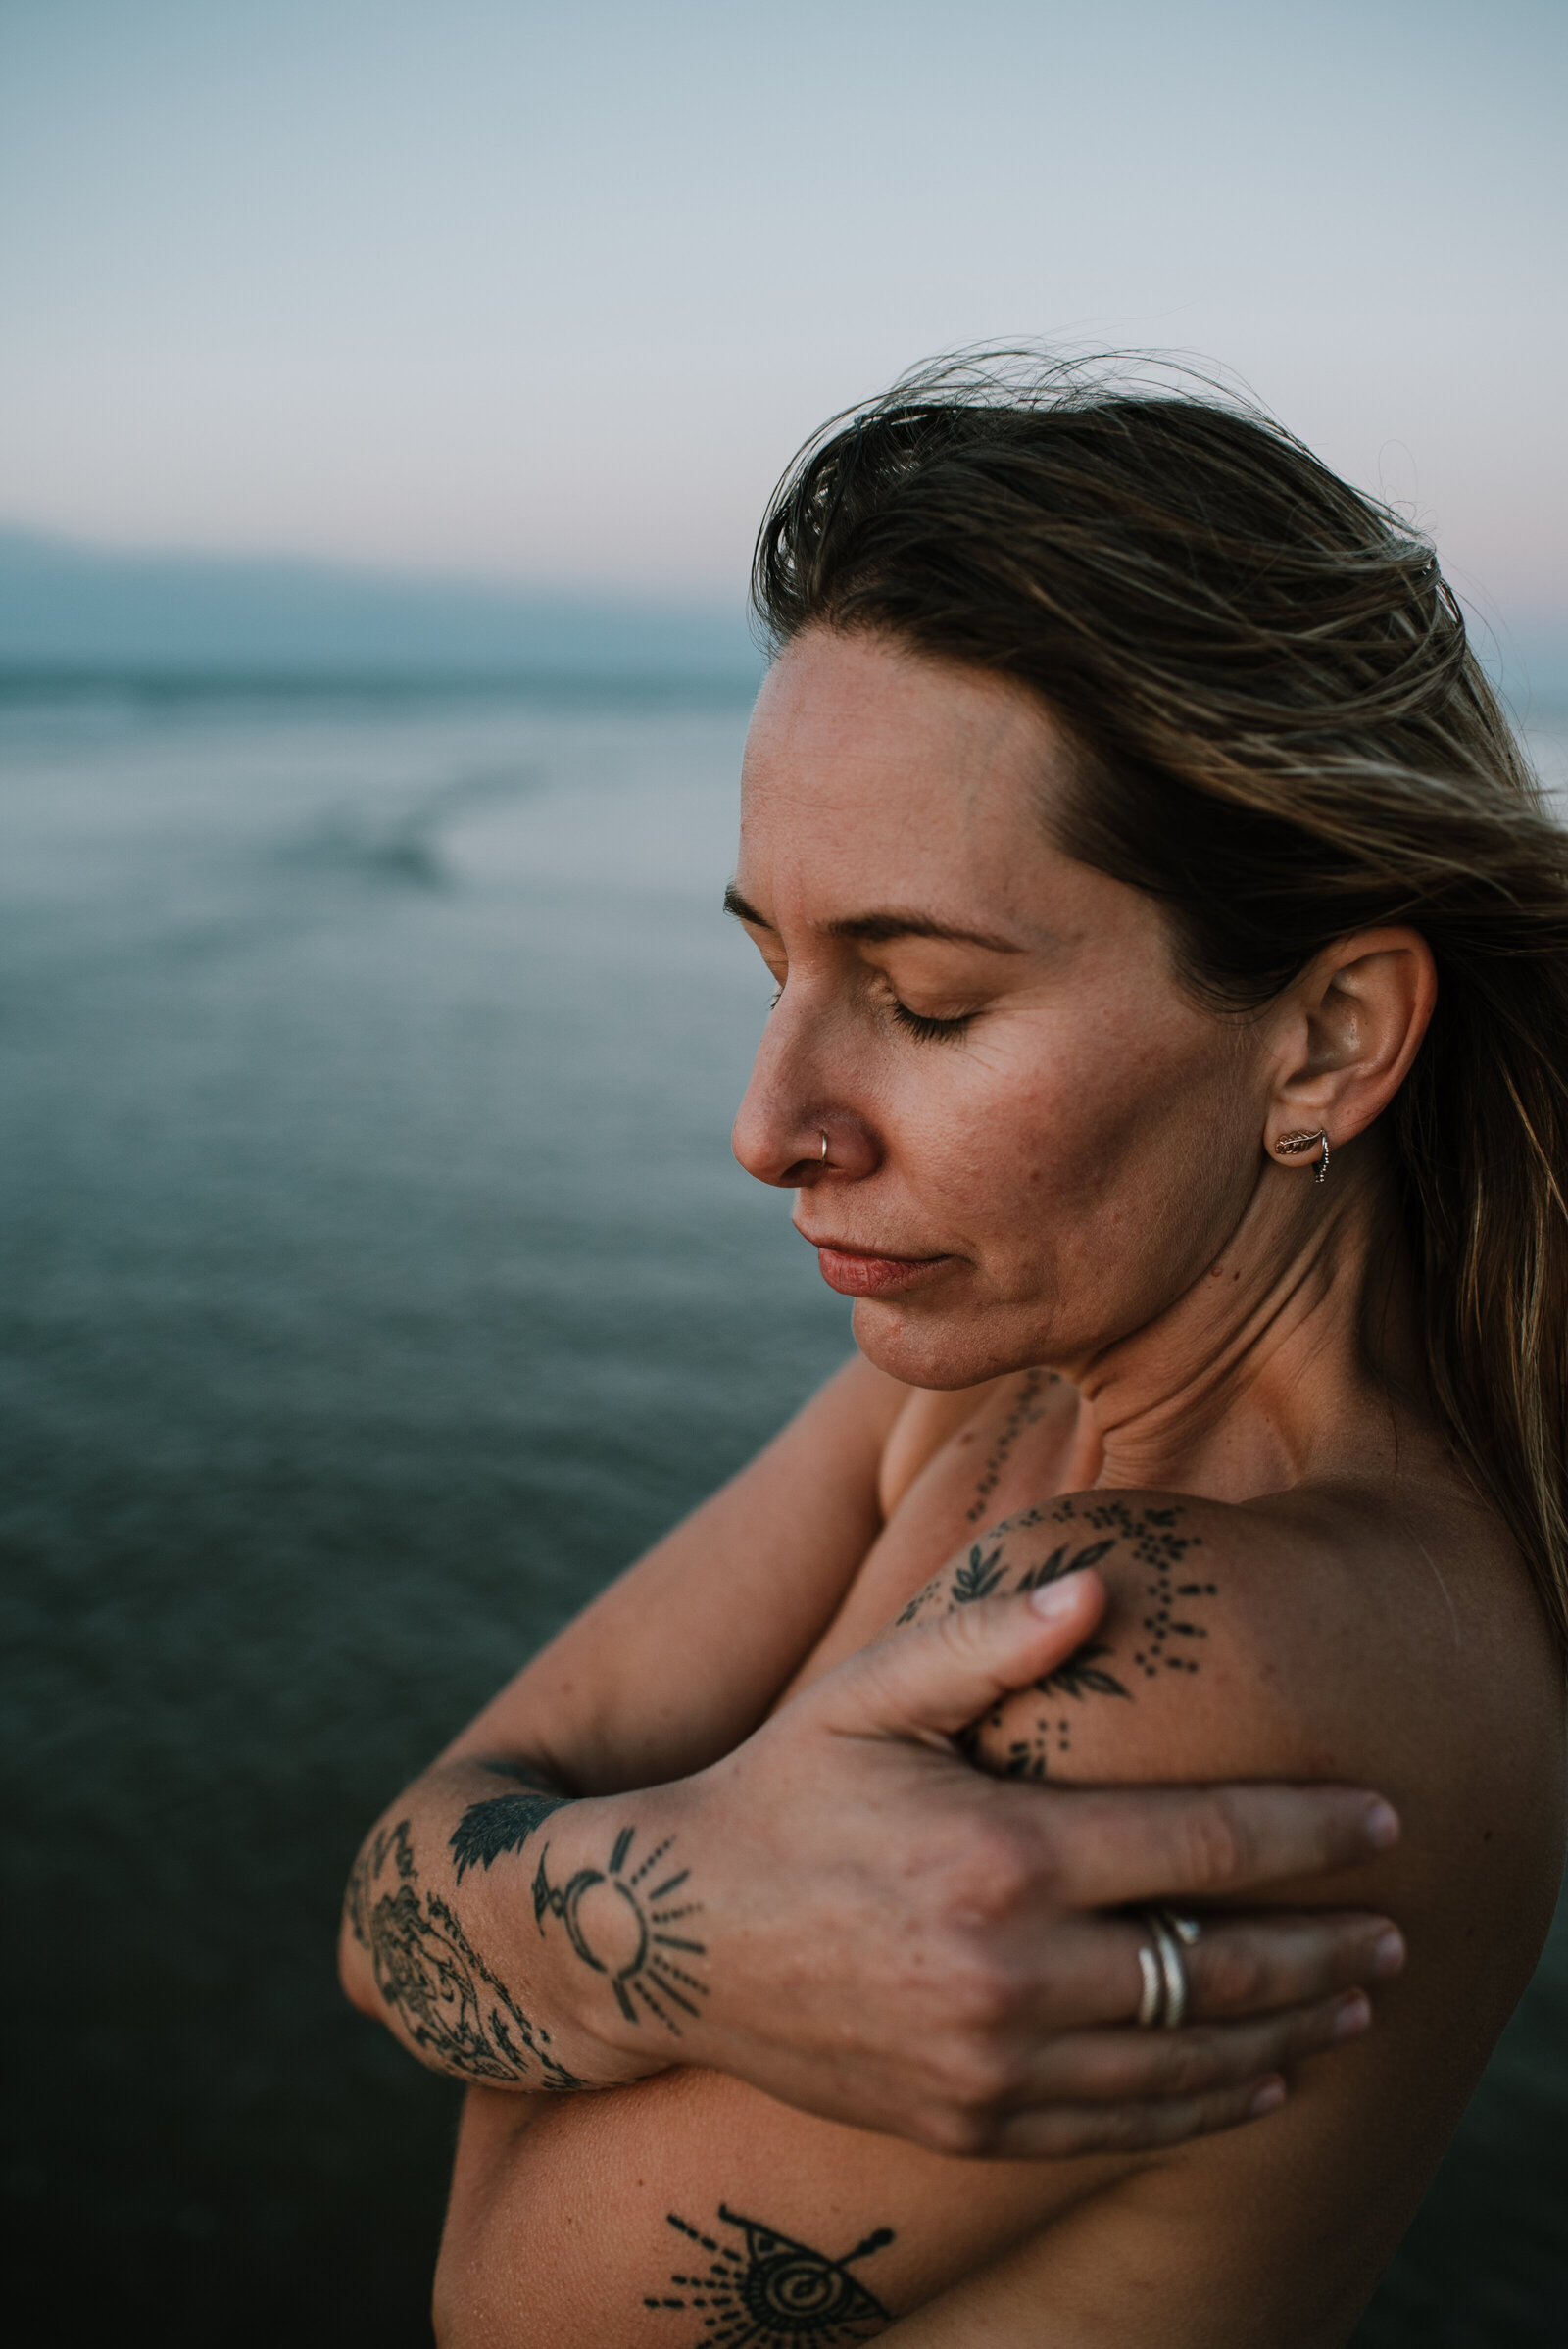 woman is hugging herself close, stood in the blue ocean, her skin is bare and she is covered in tattoos. she looks calm and safe